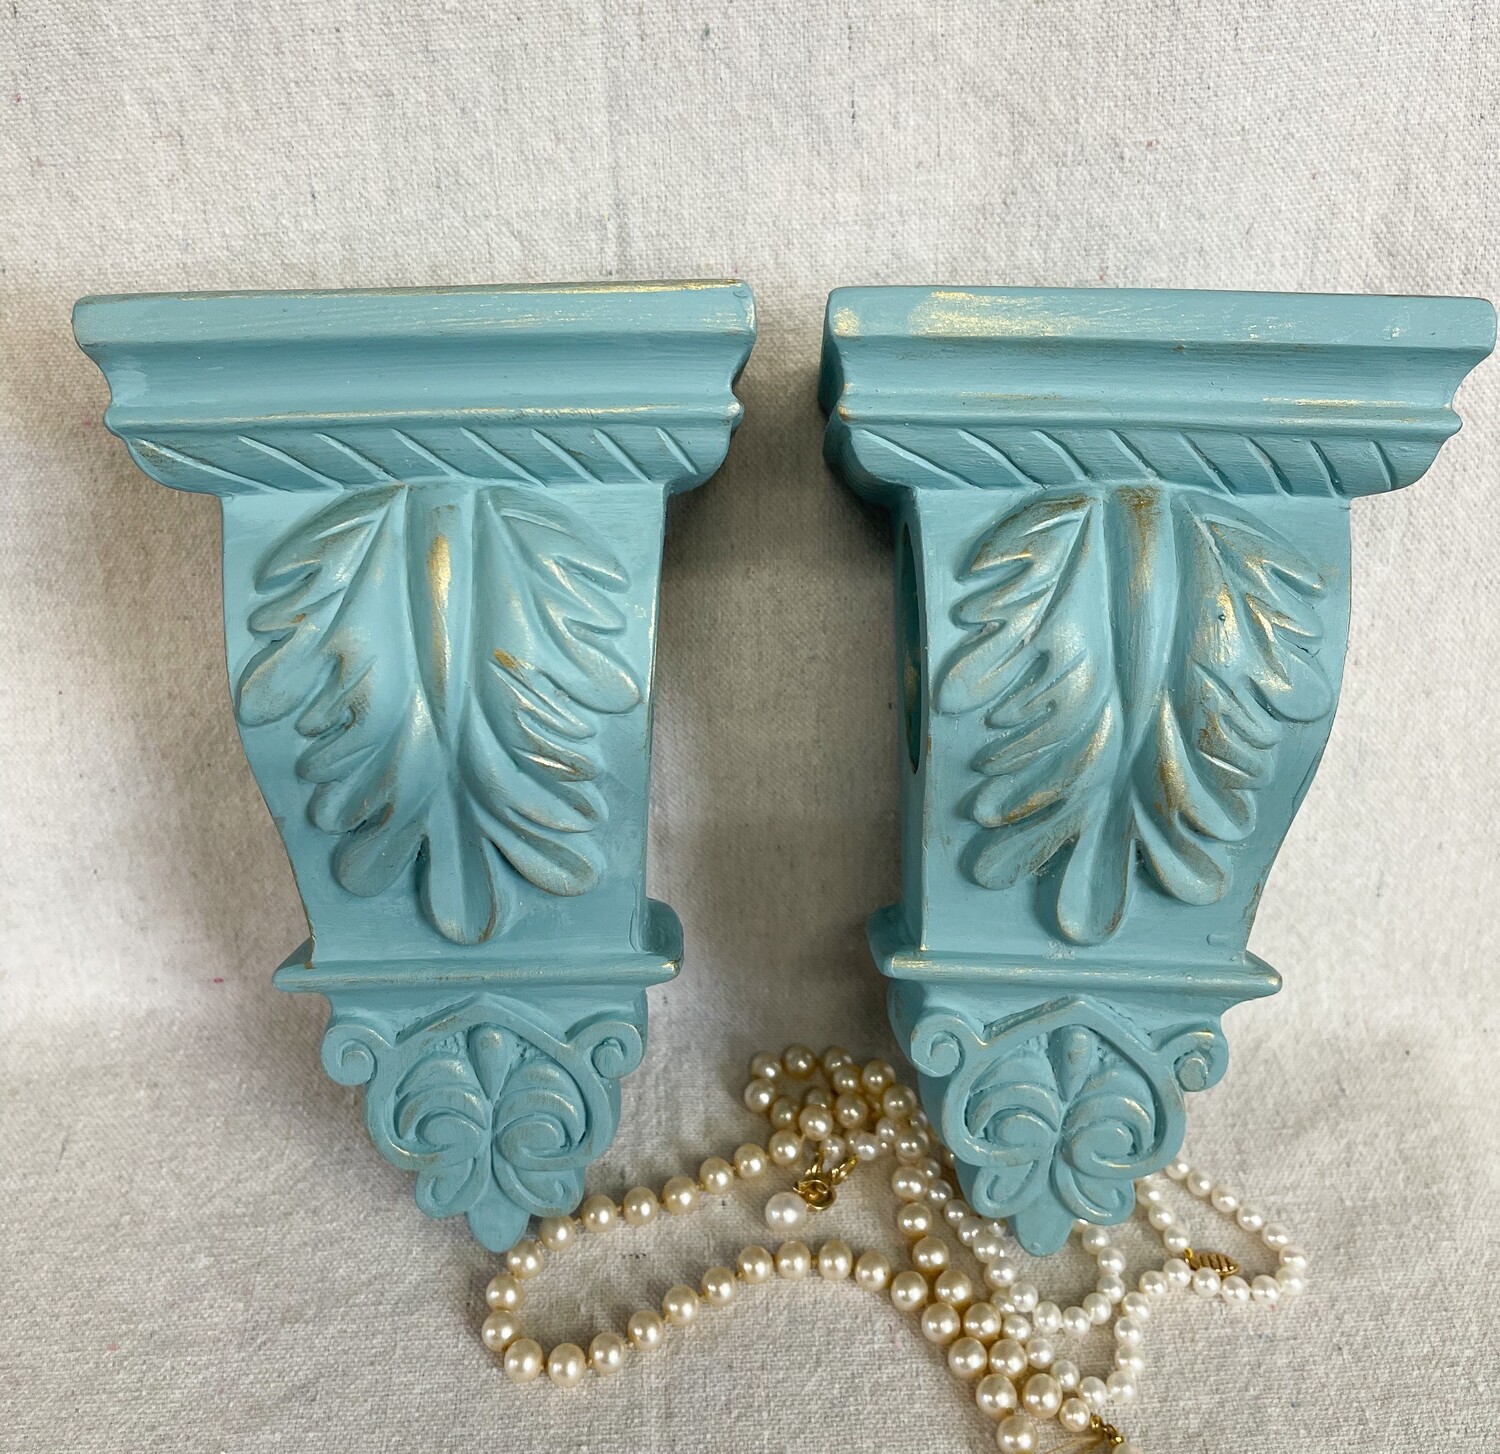 French Country Inspired Corbels